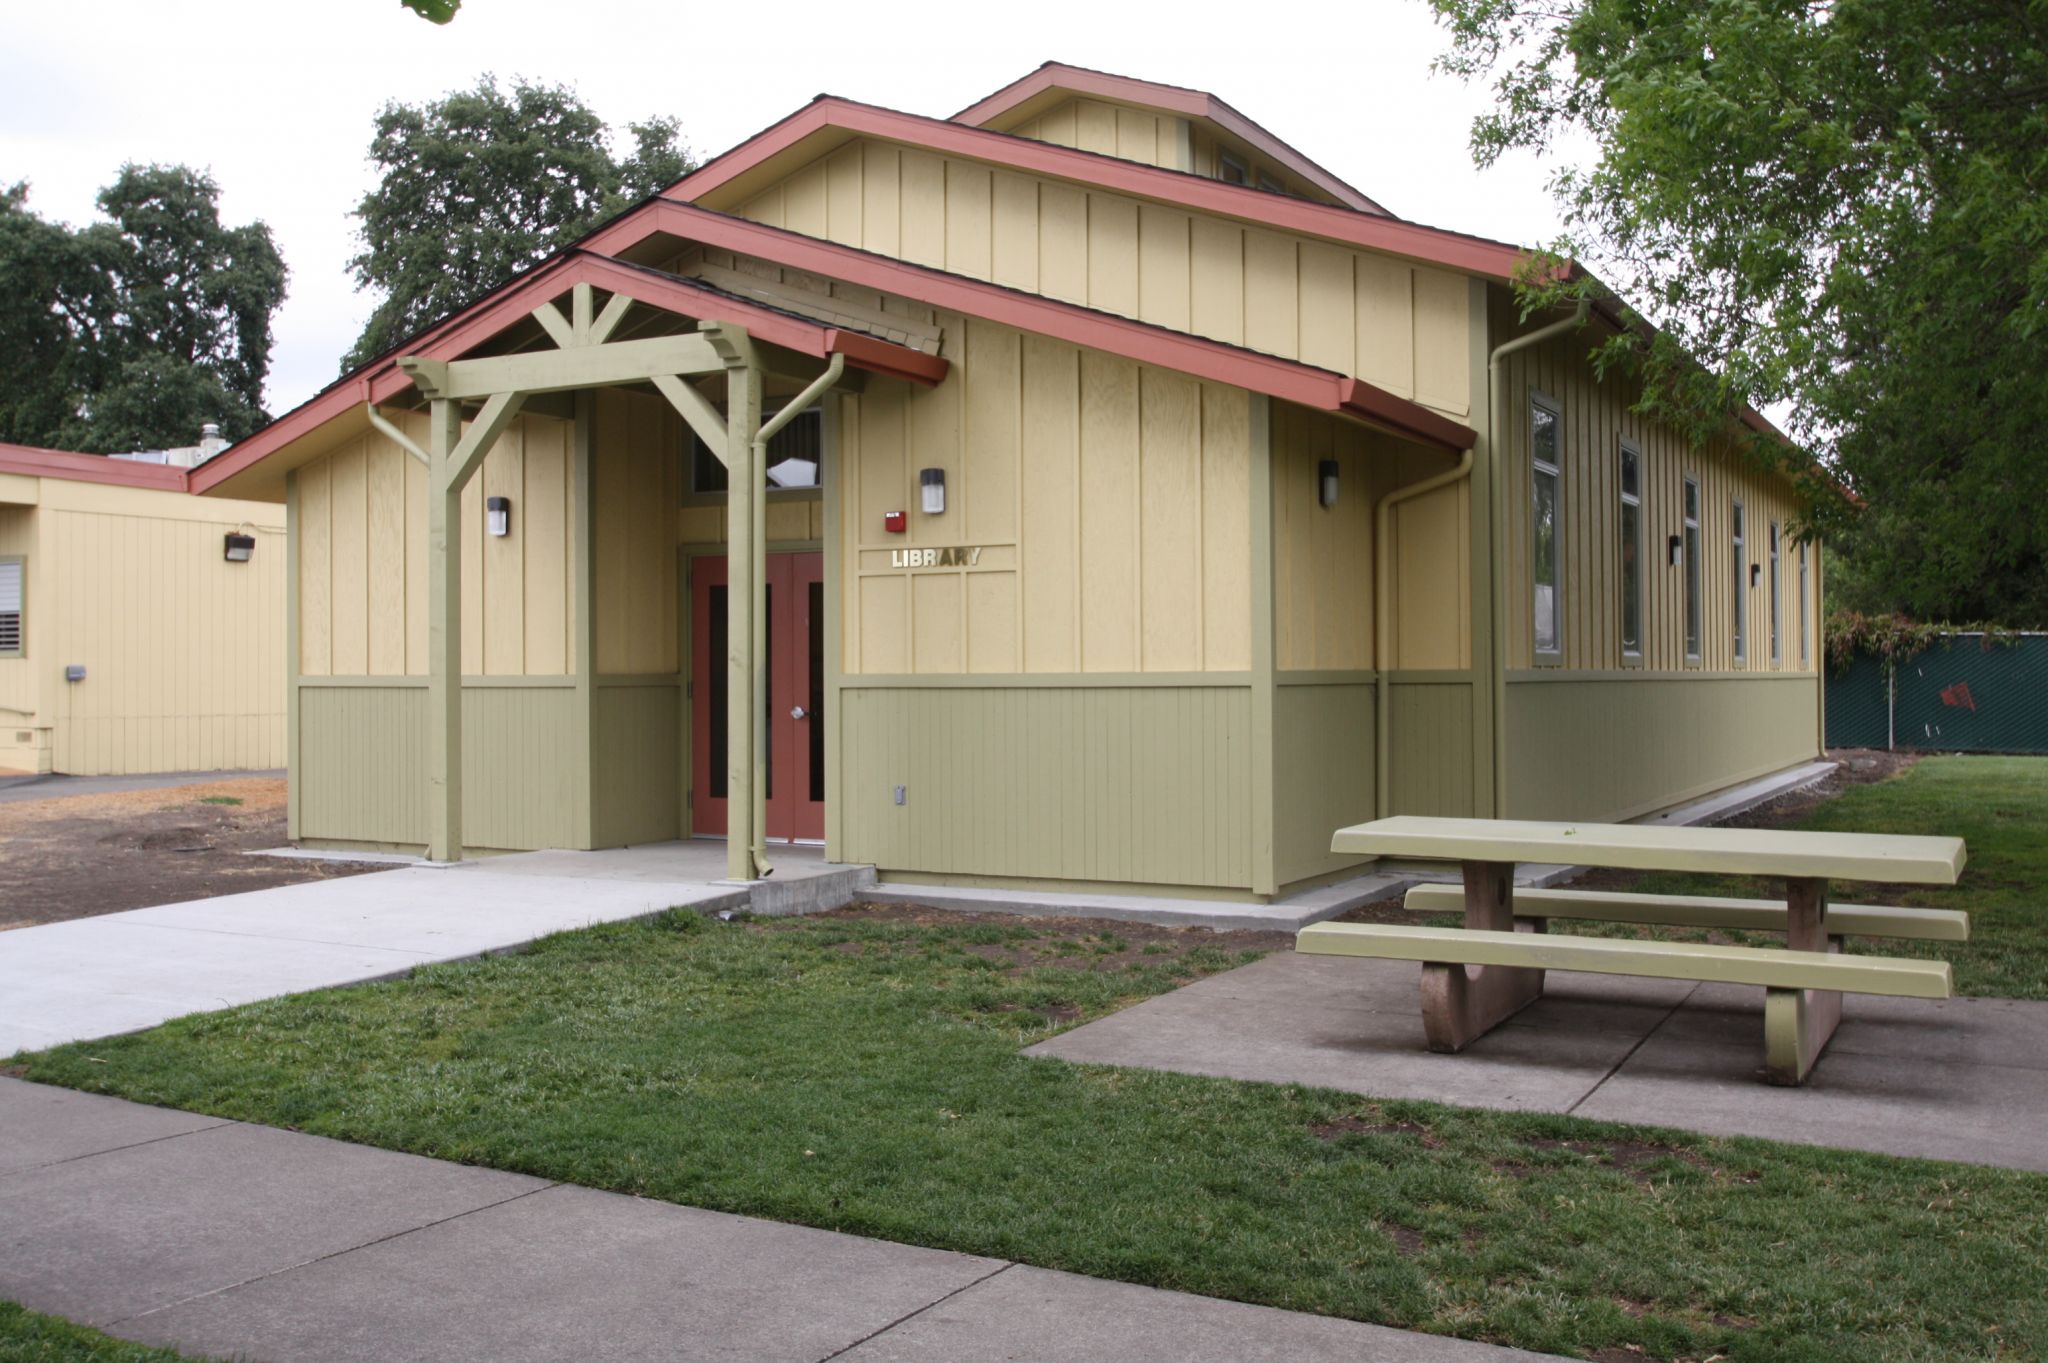 Exterior of Modular Library Building at Roseland Elementary School